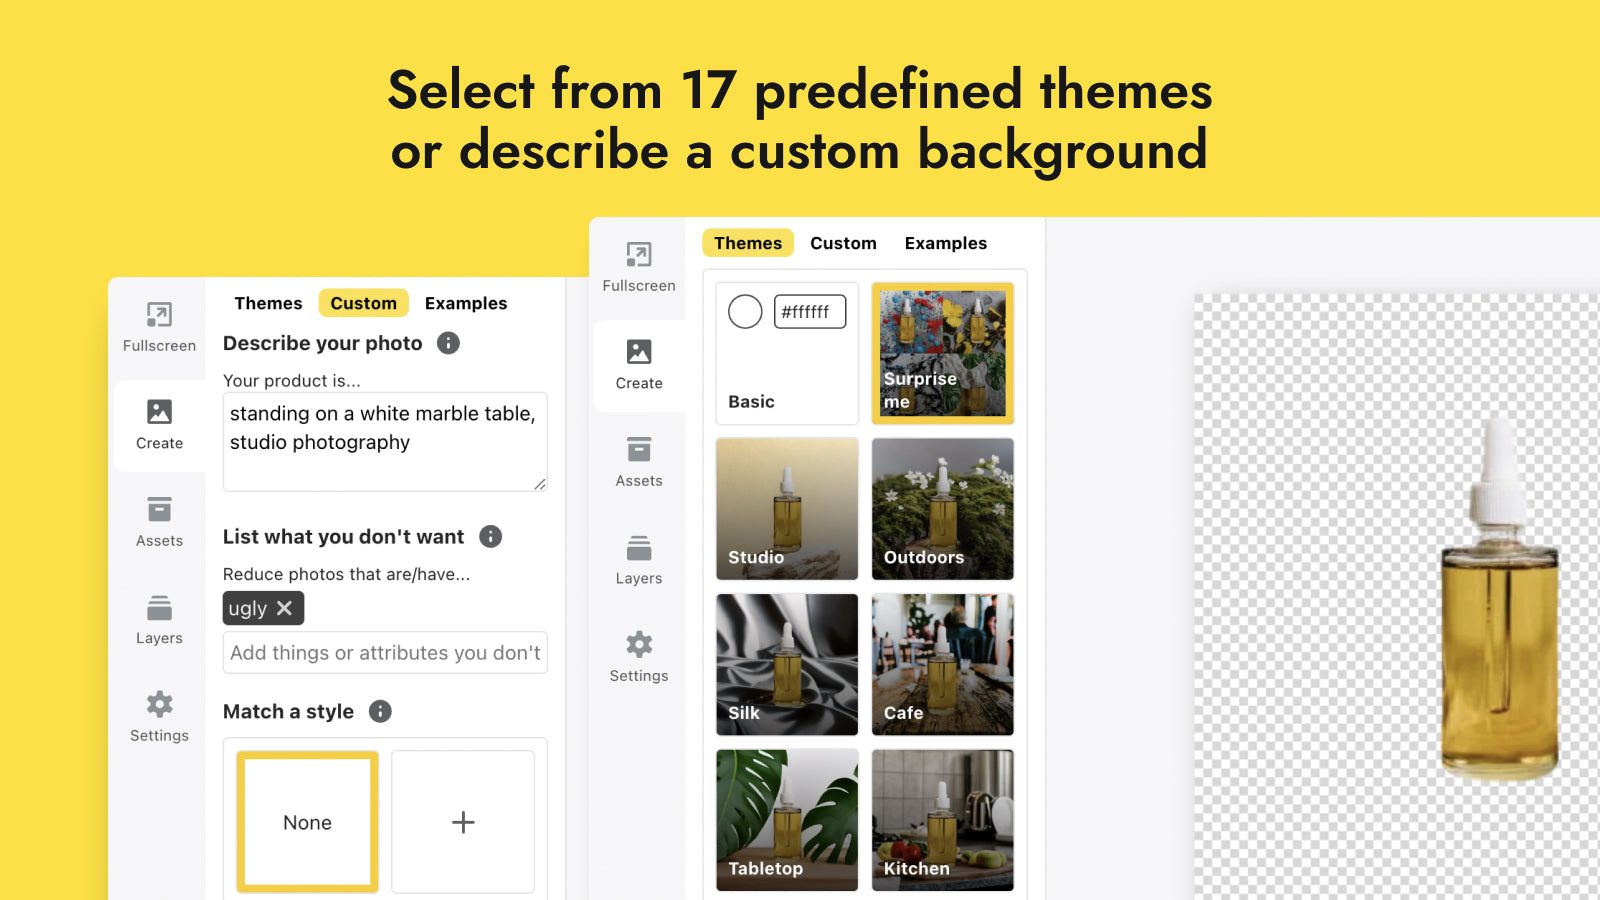 Select from 17 predefined themes or describe a custom background